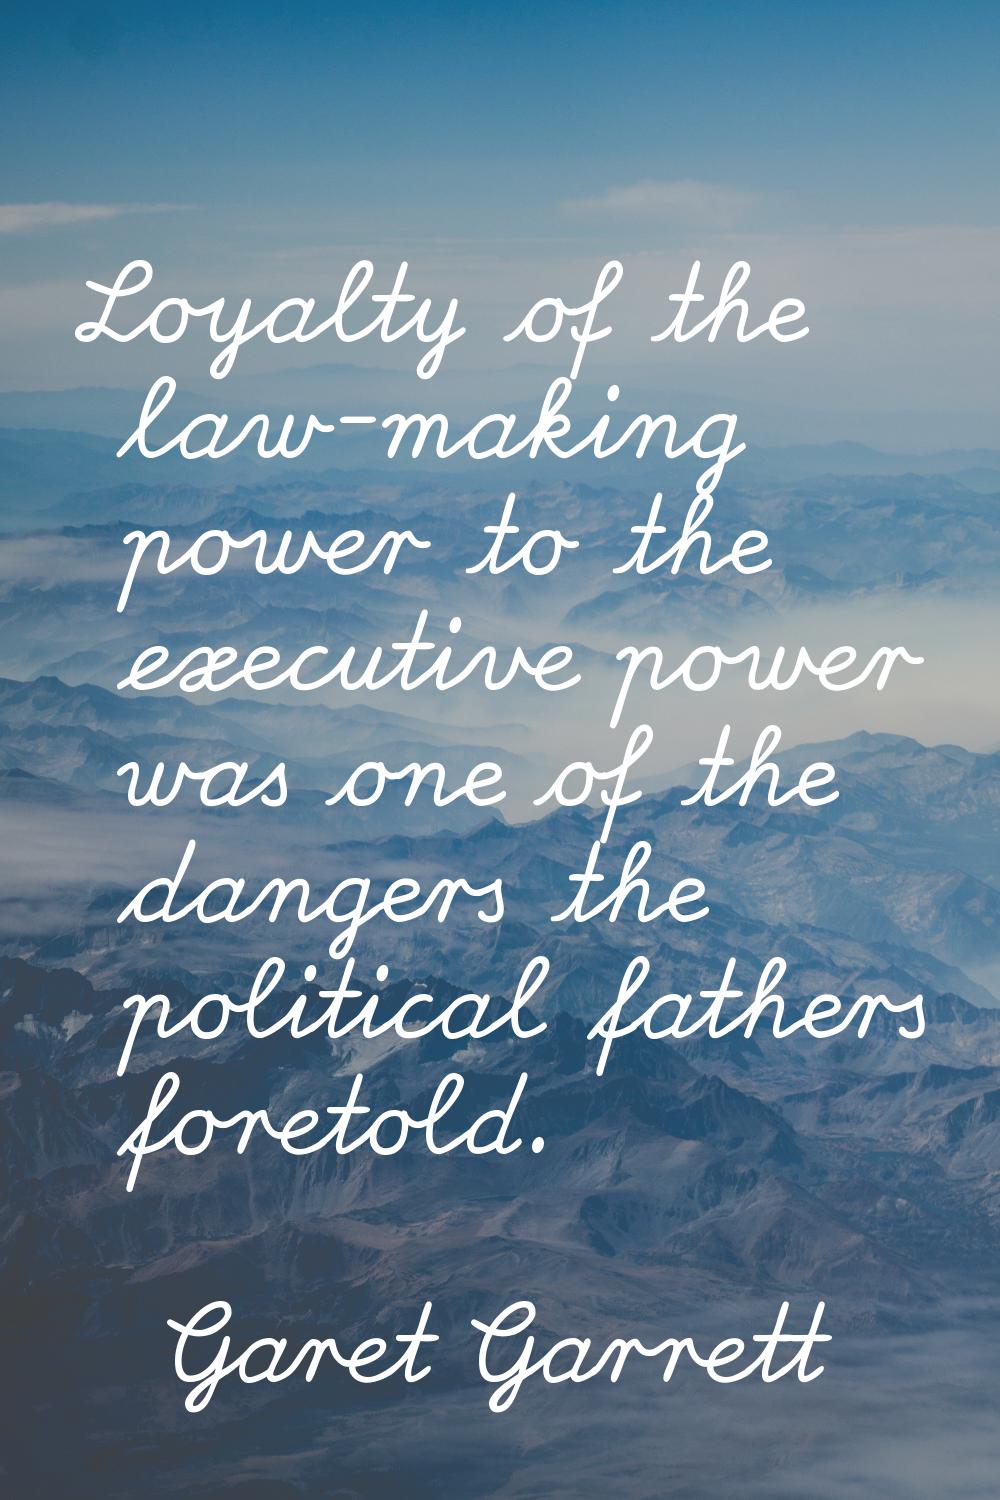 Loyalty of the law-making power to the executive power was one of the dangers the political fathers